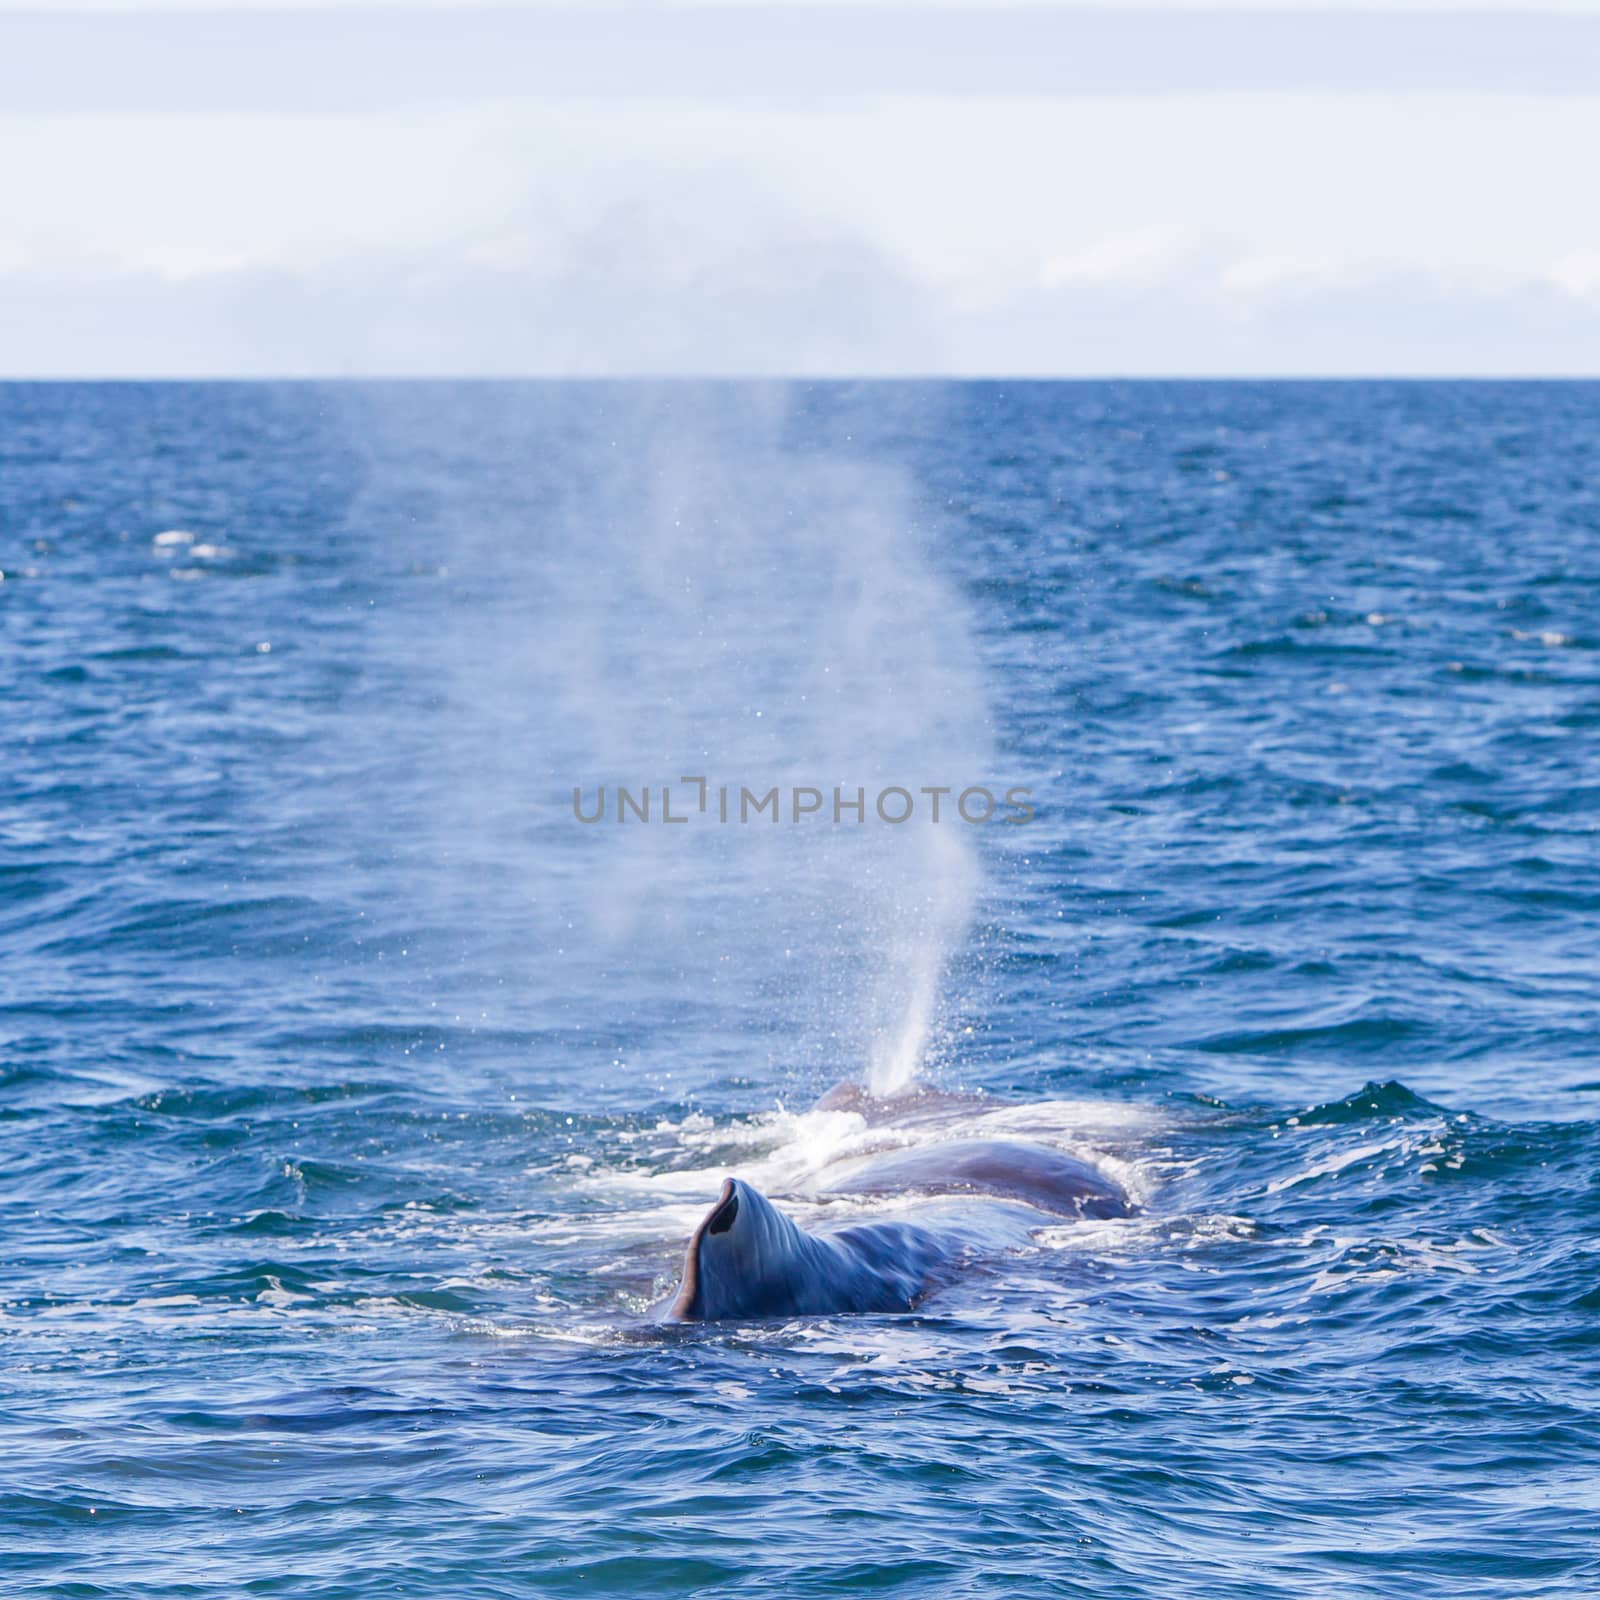 Blowout of a large Sperm Whale near Iceland by michaklootwijk